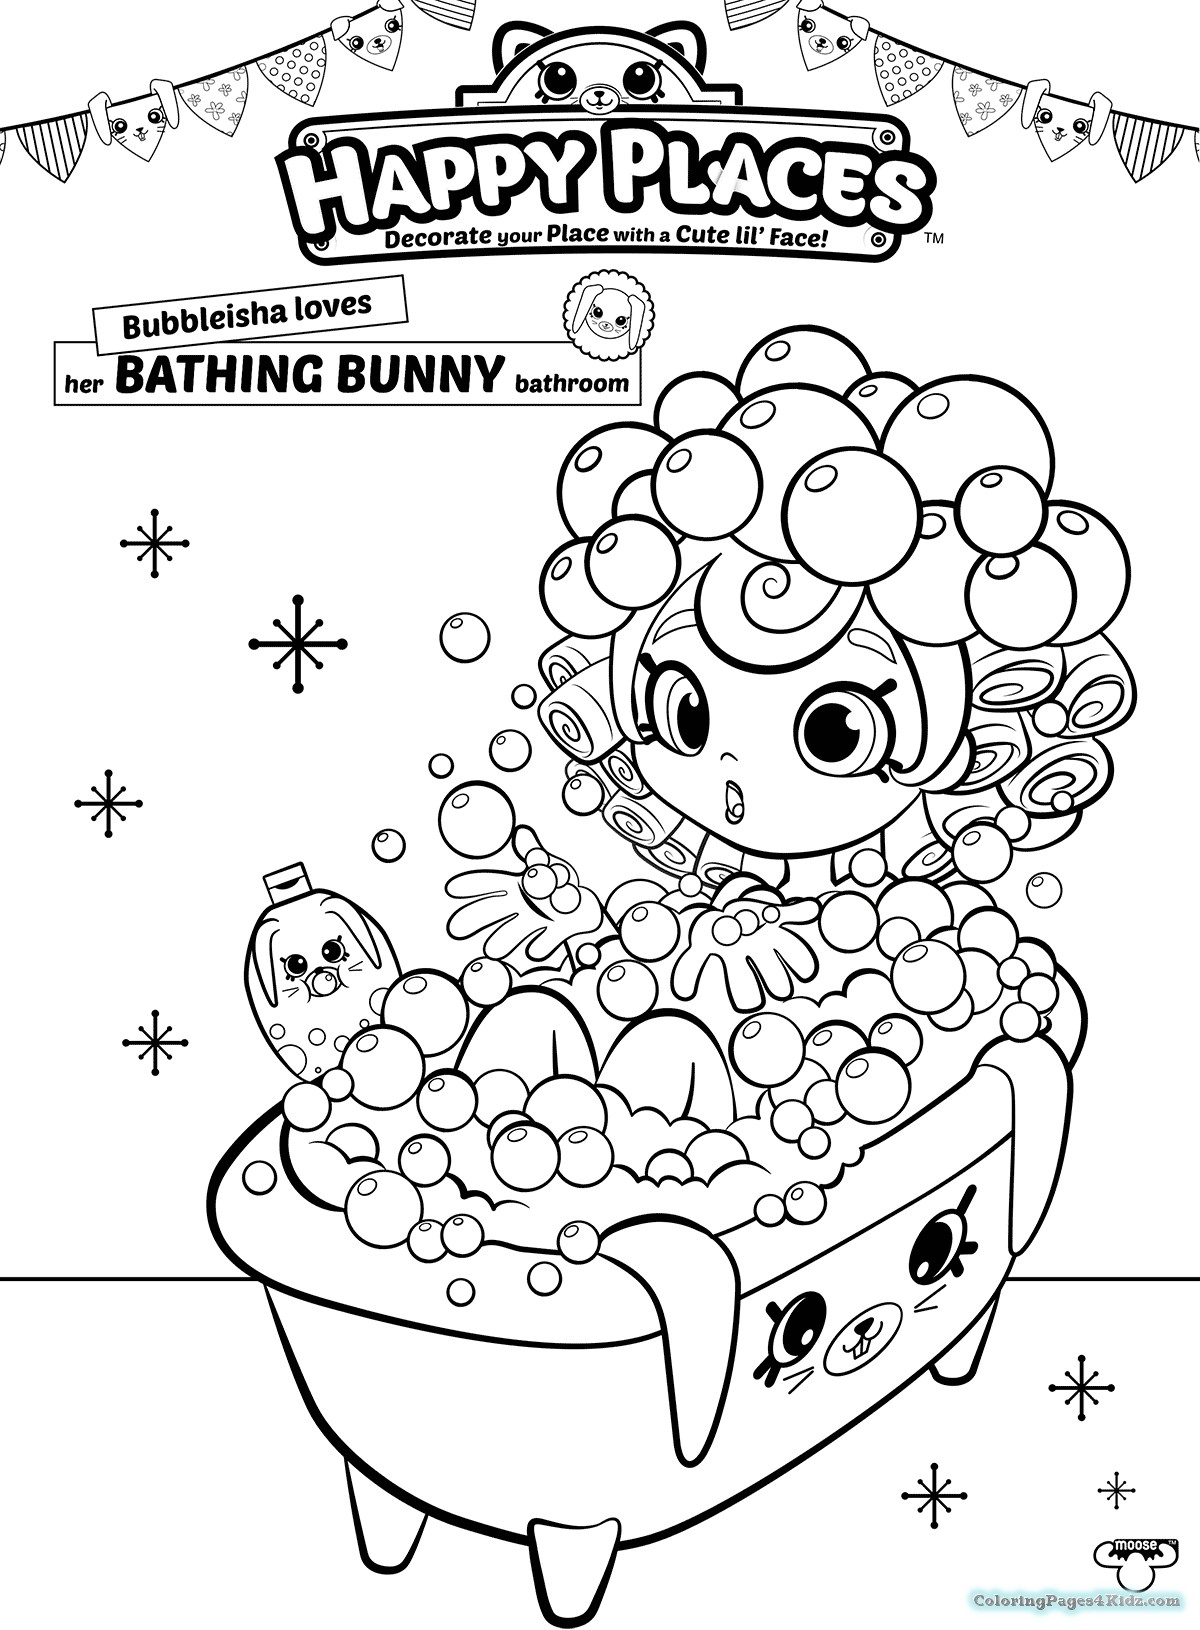 Shopkins Coloring Pages Shoppies at GetDrawings | Free ...